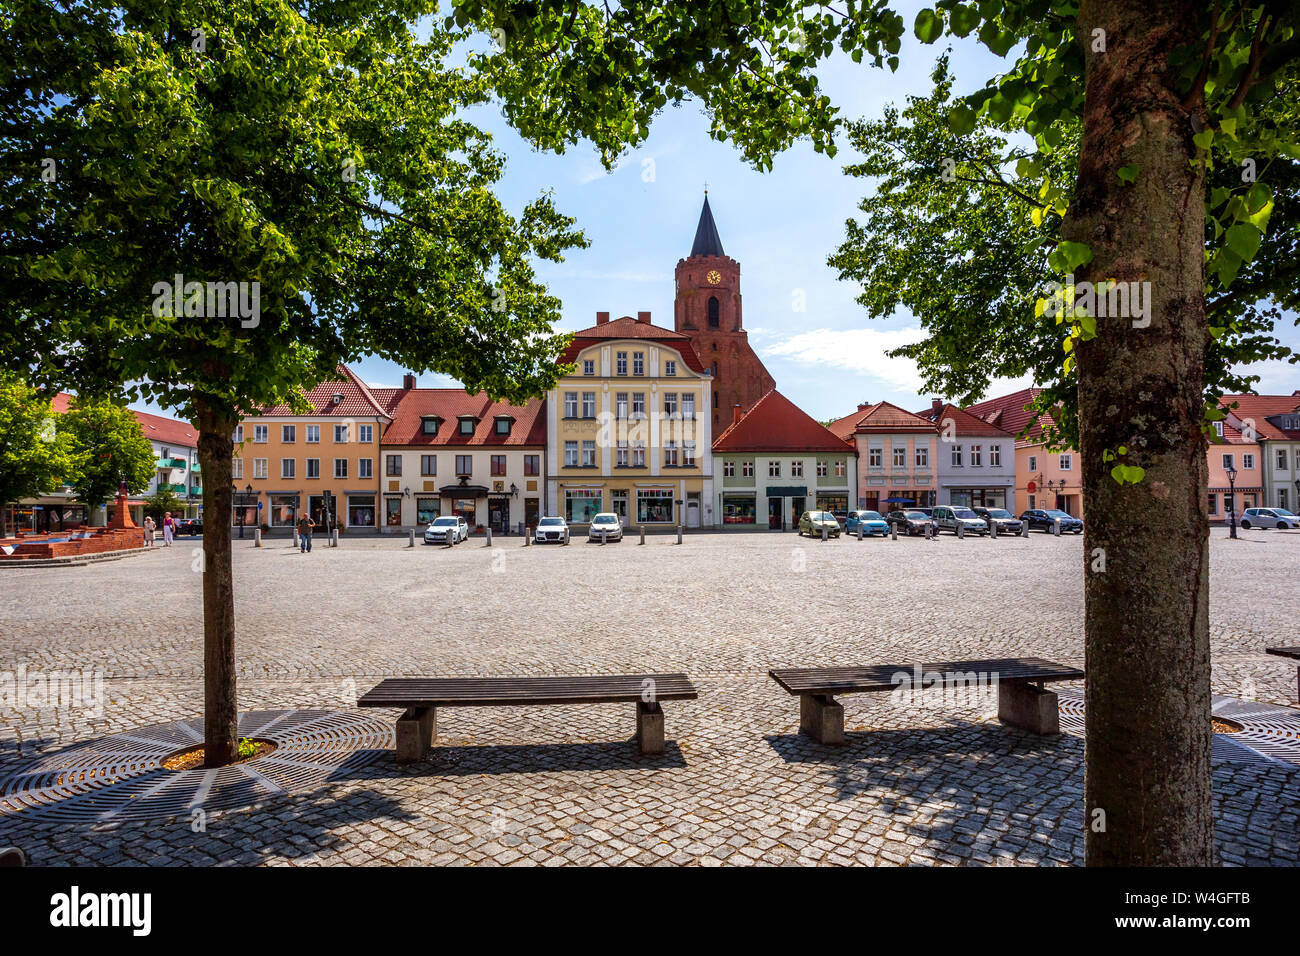 Market square and St. Mary's Church, Beeskow, Germany Stock Photo